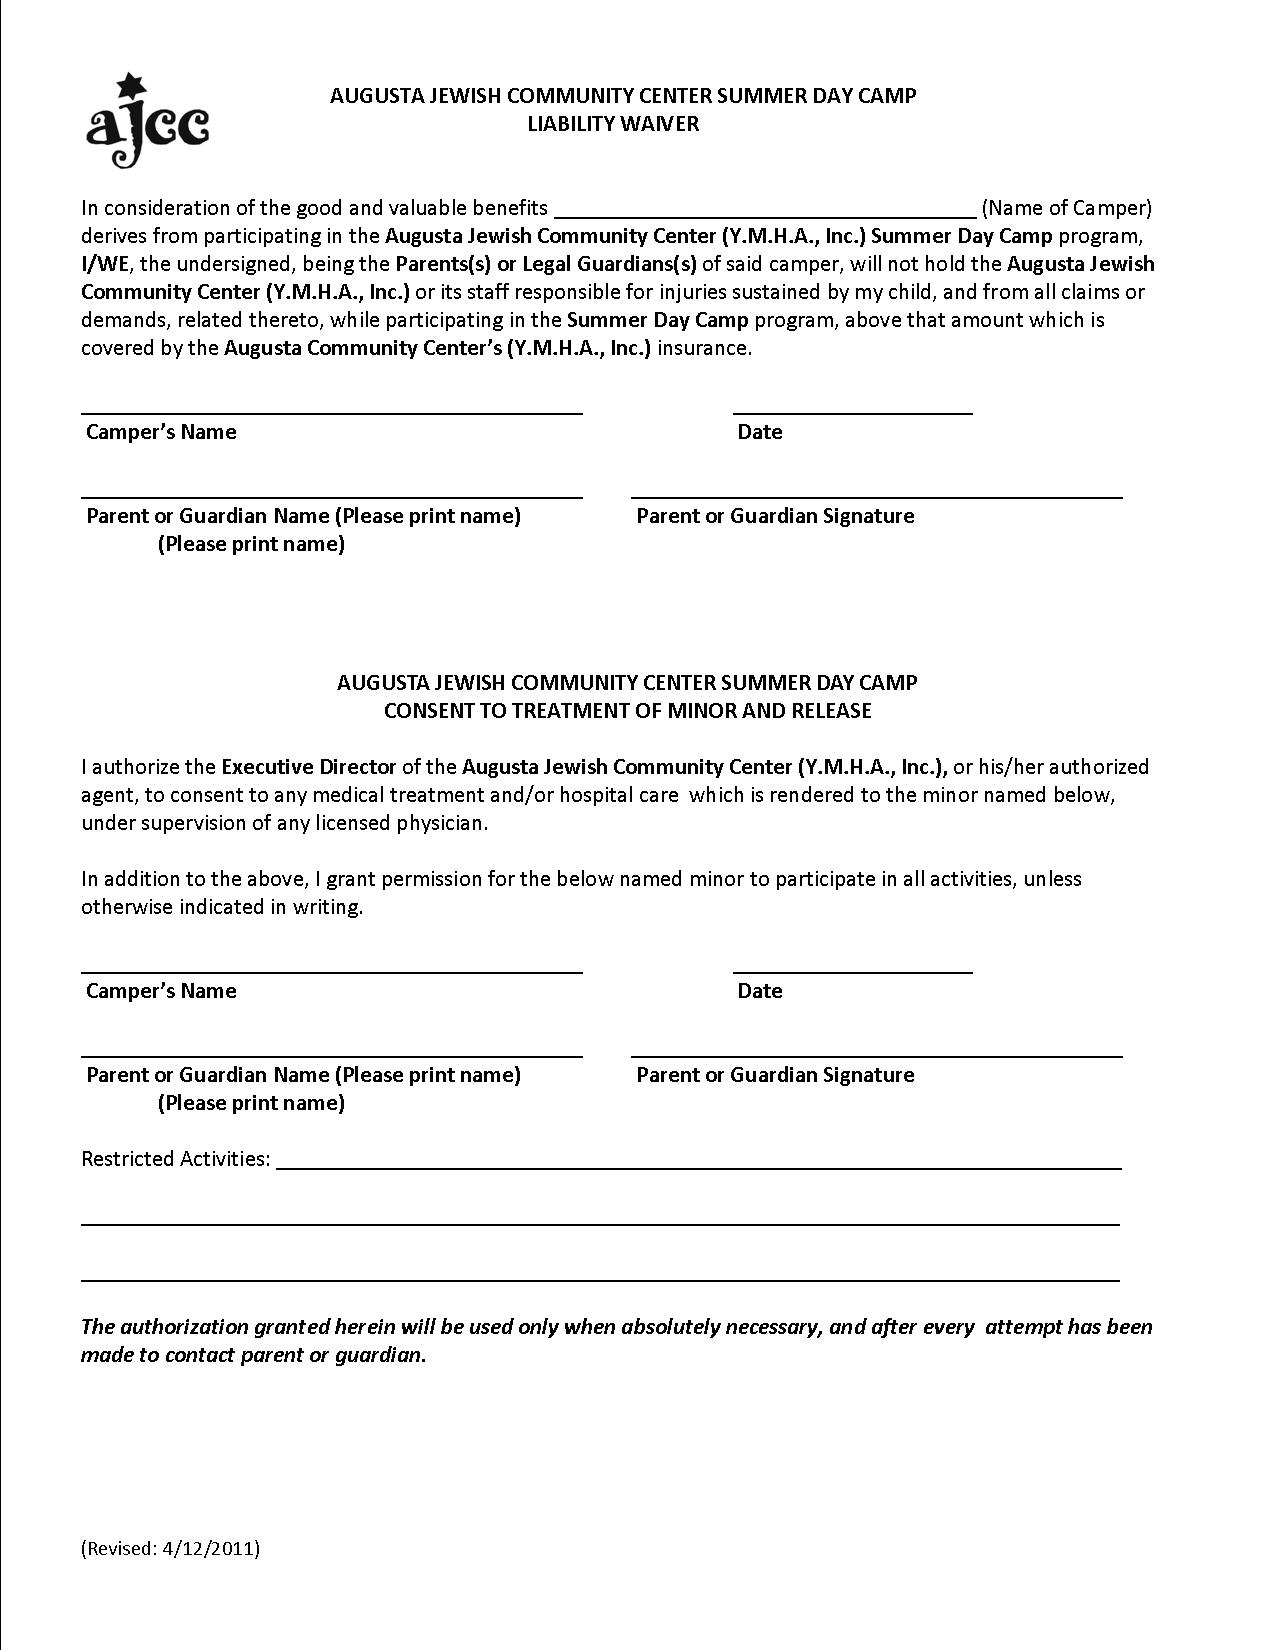 Legal Liability Waiver Form Free Printable Documents